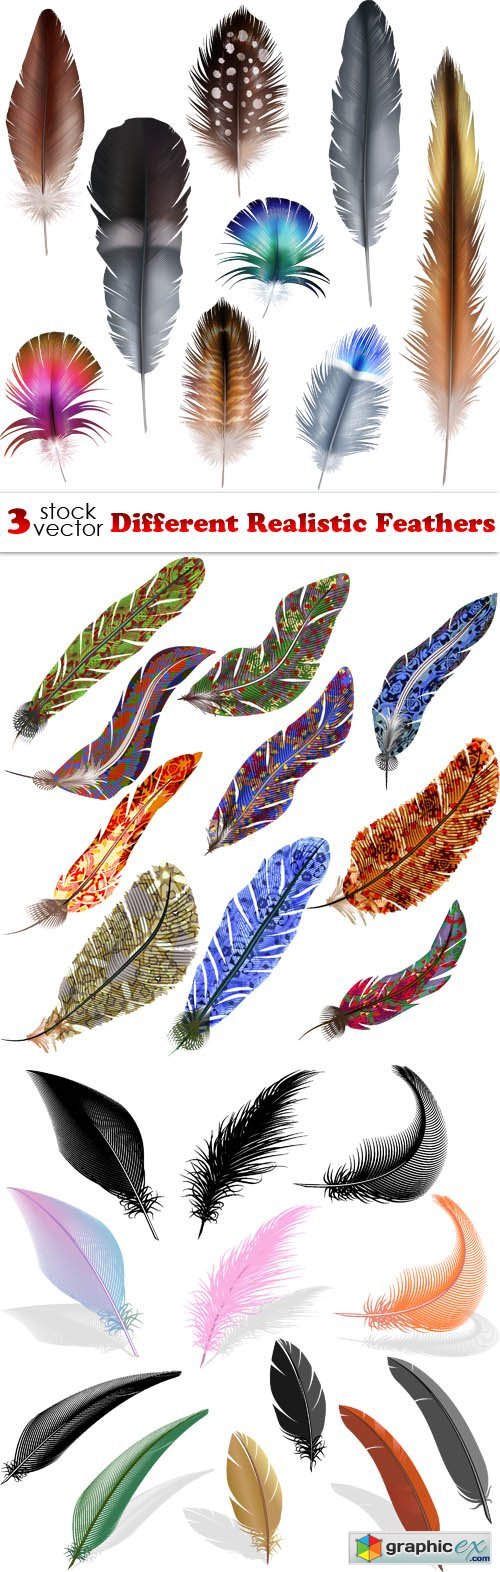 Different Realistic Feathers